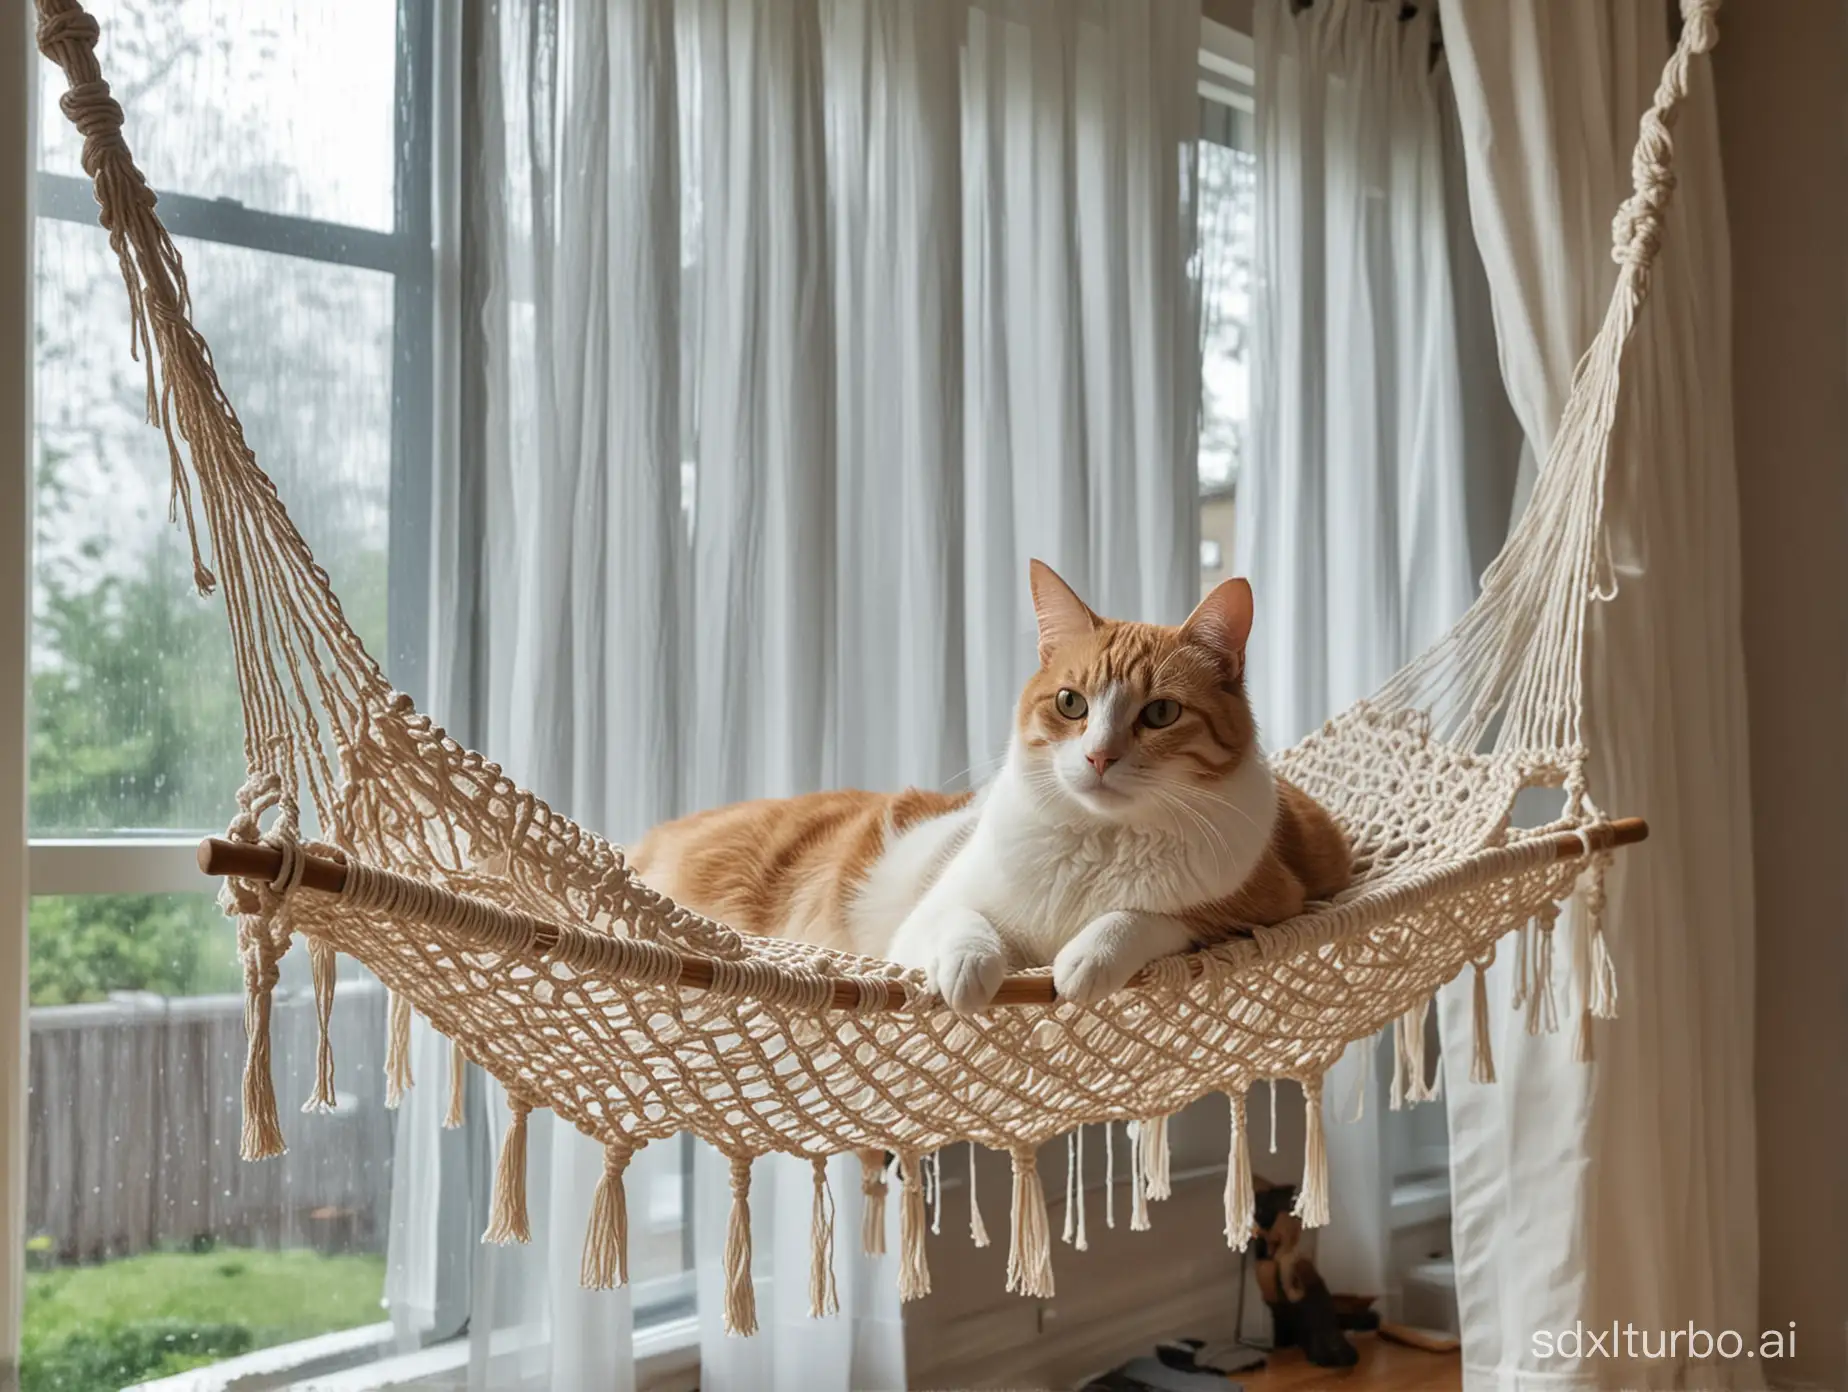 macrame cat hammock the curtains are blowing , raining outside